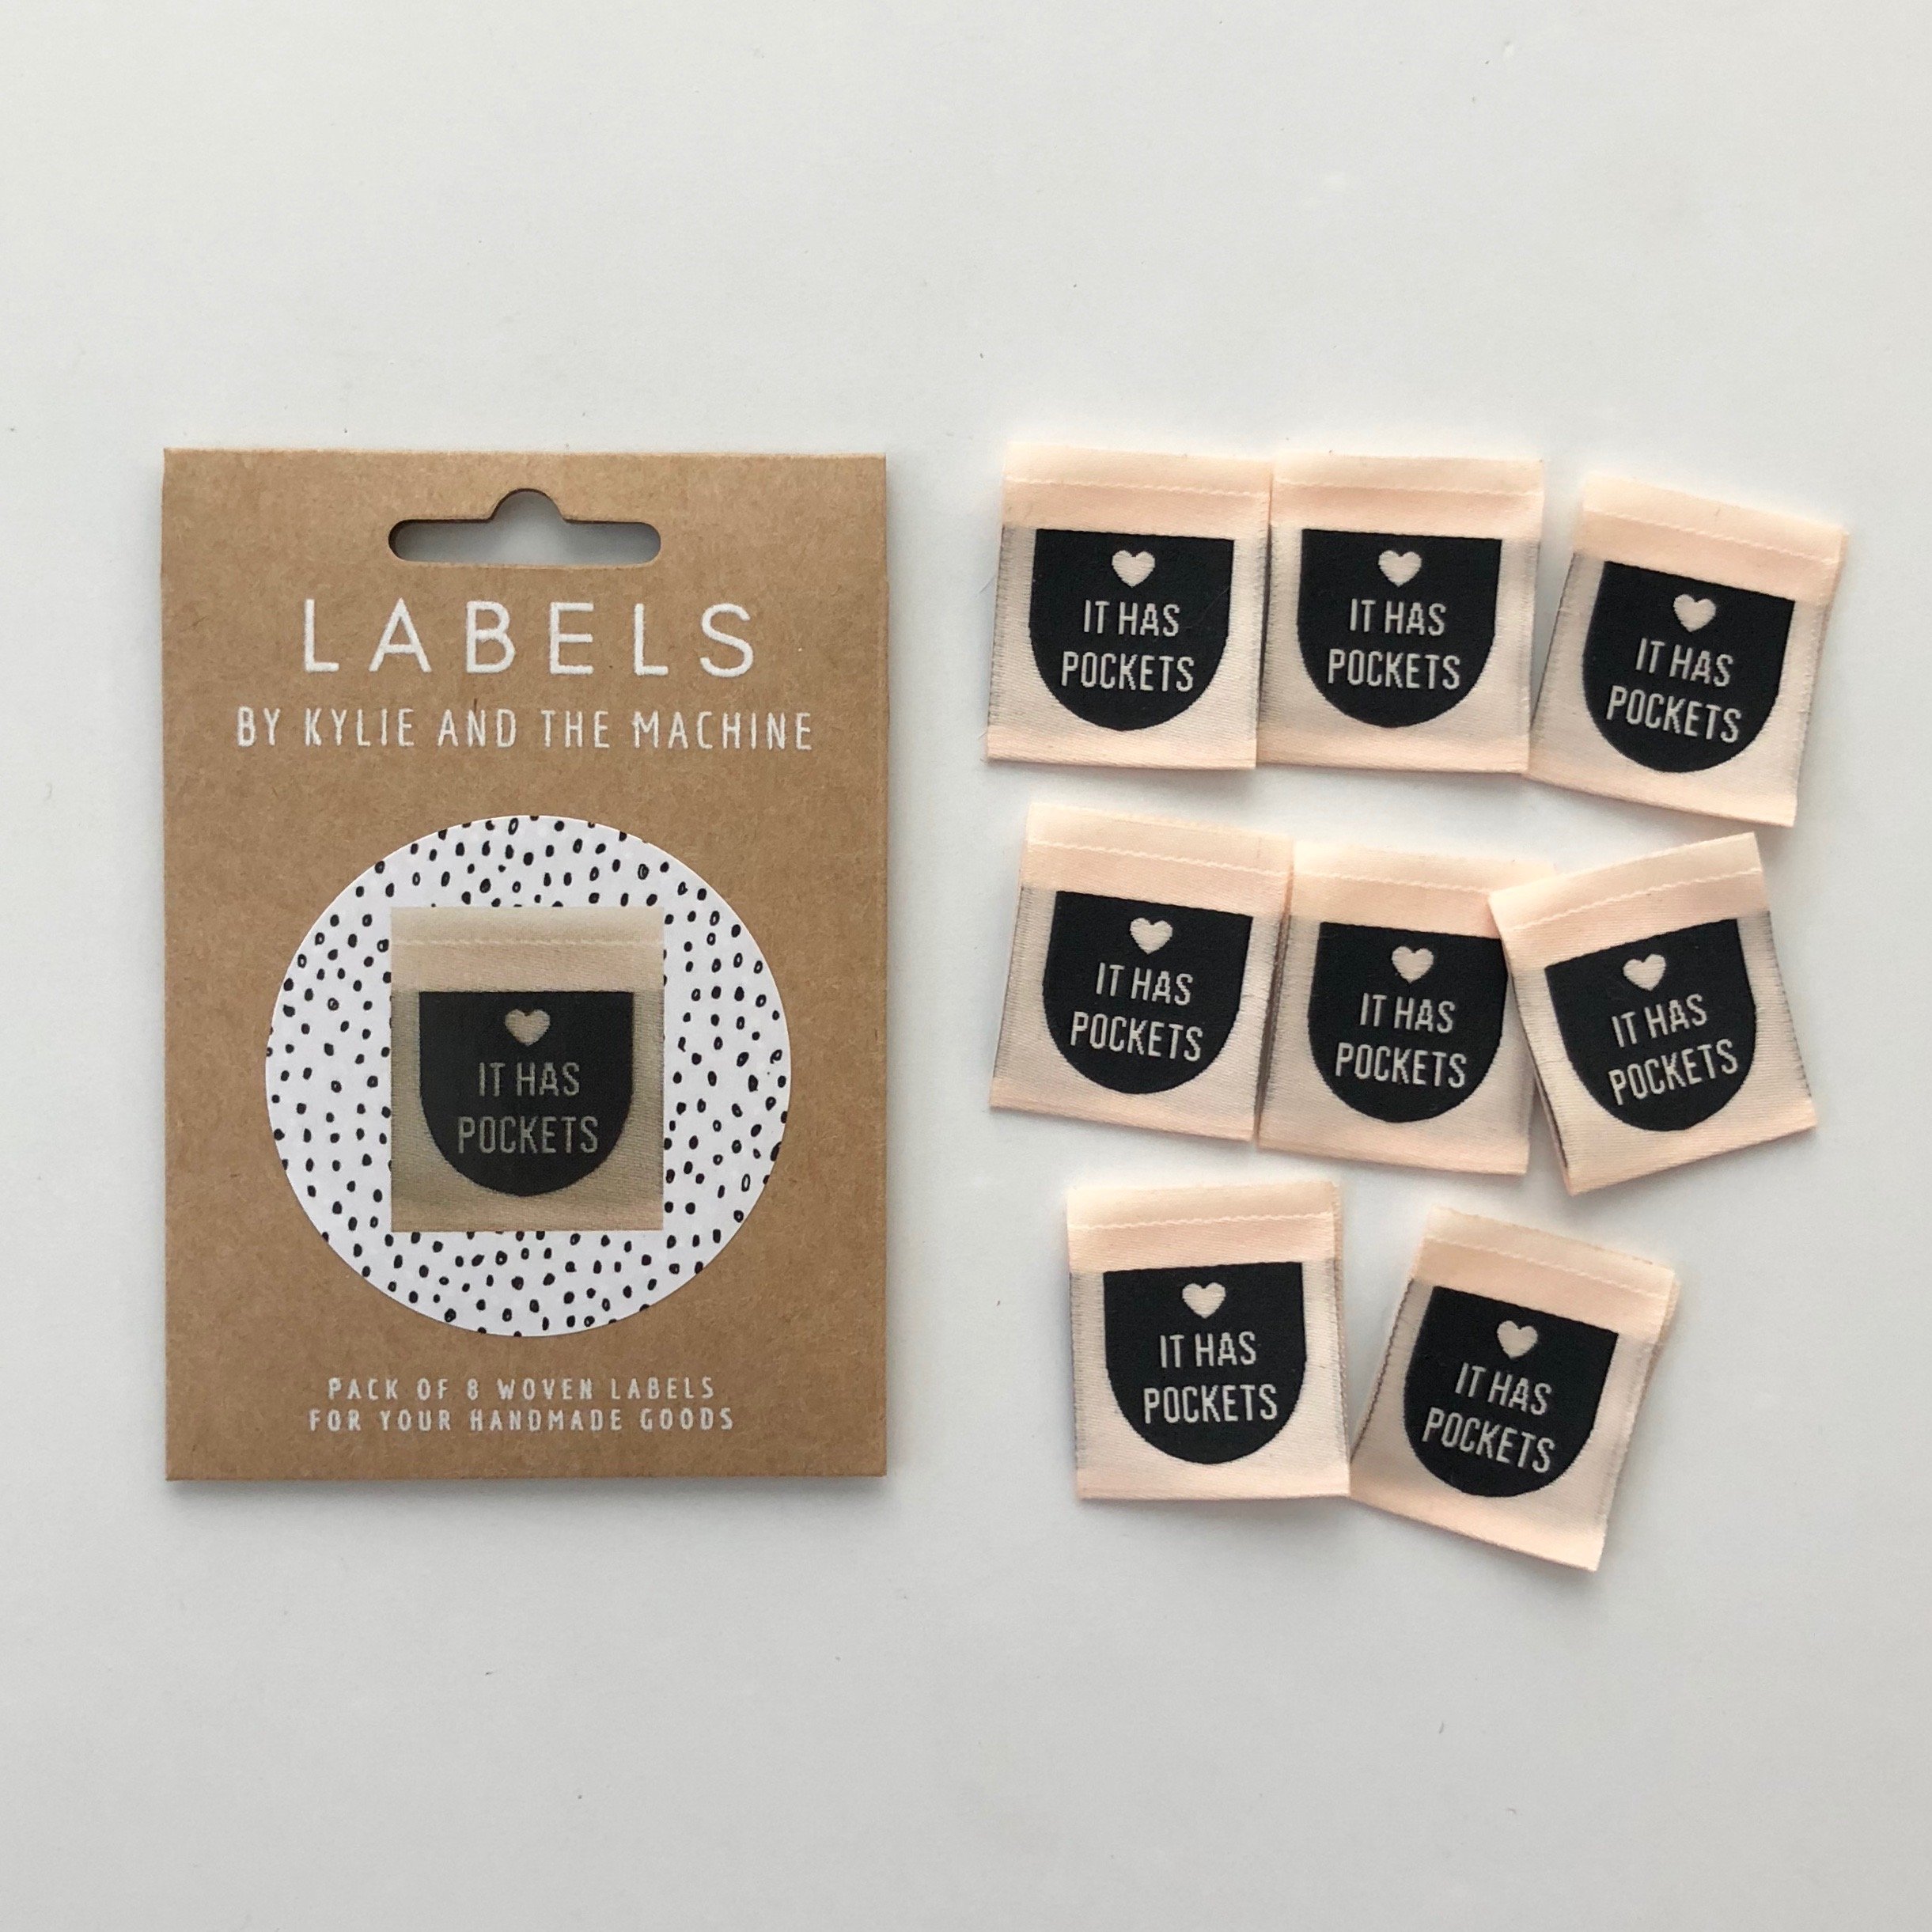 pack of 10 Kylie and the Machine Woven Labels Bespoke